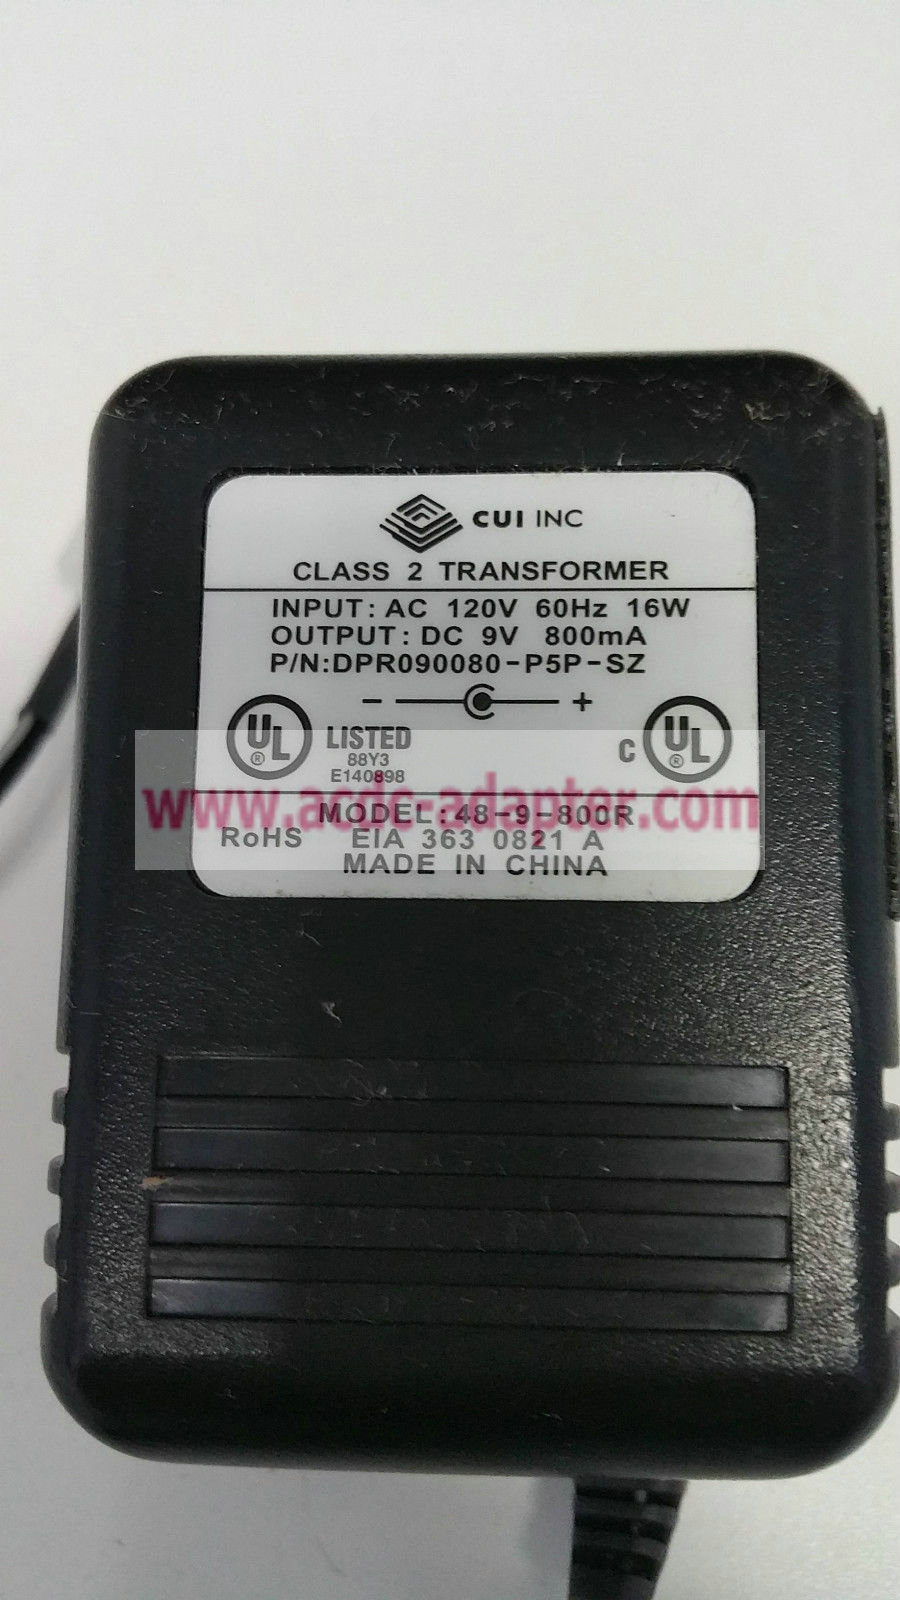 New CUI DPR090080-P5P-SZ 48-9-800R Power Adapter 9VDC 800mA AC ADAPTER - Click Image to Close